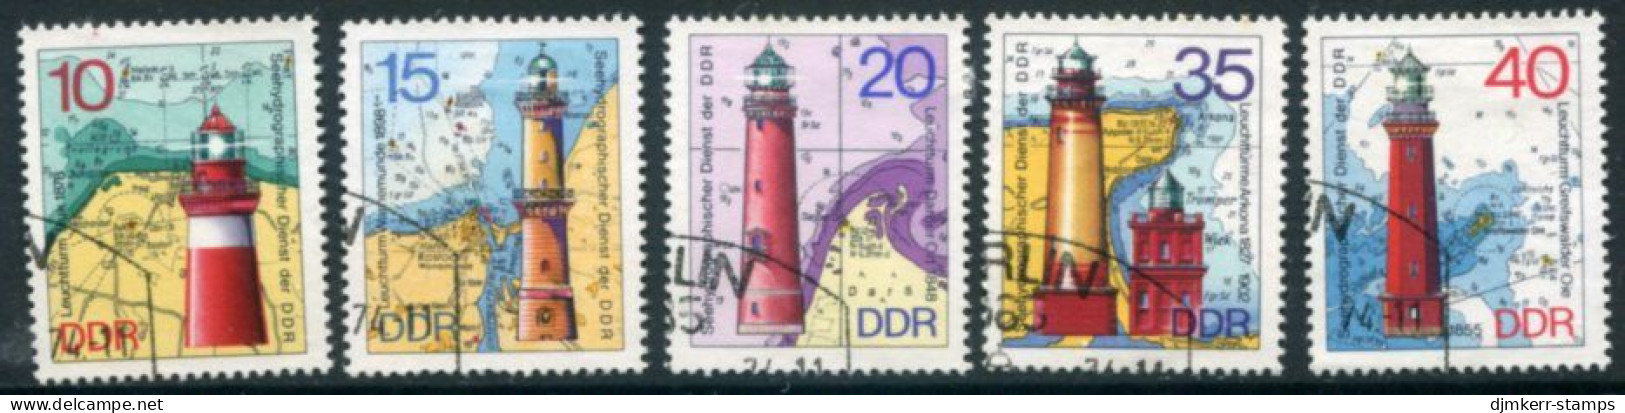 DDR / E. GERMANY 1974 Lighthouses Used  Michel 1953-57 - Used Stamps